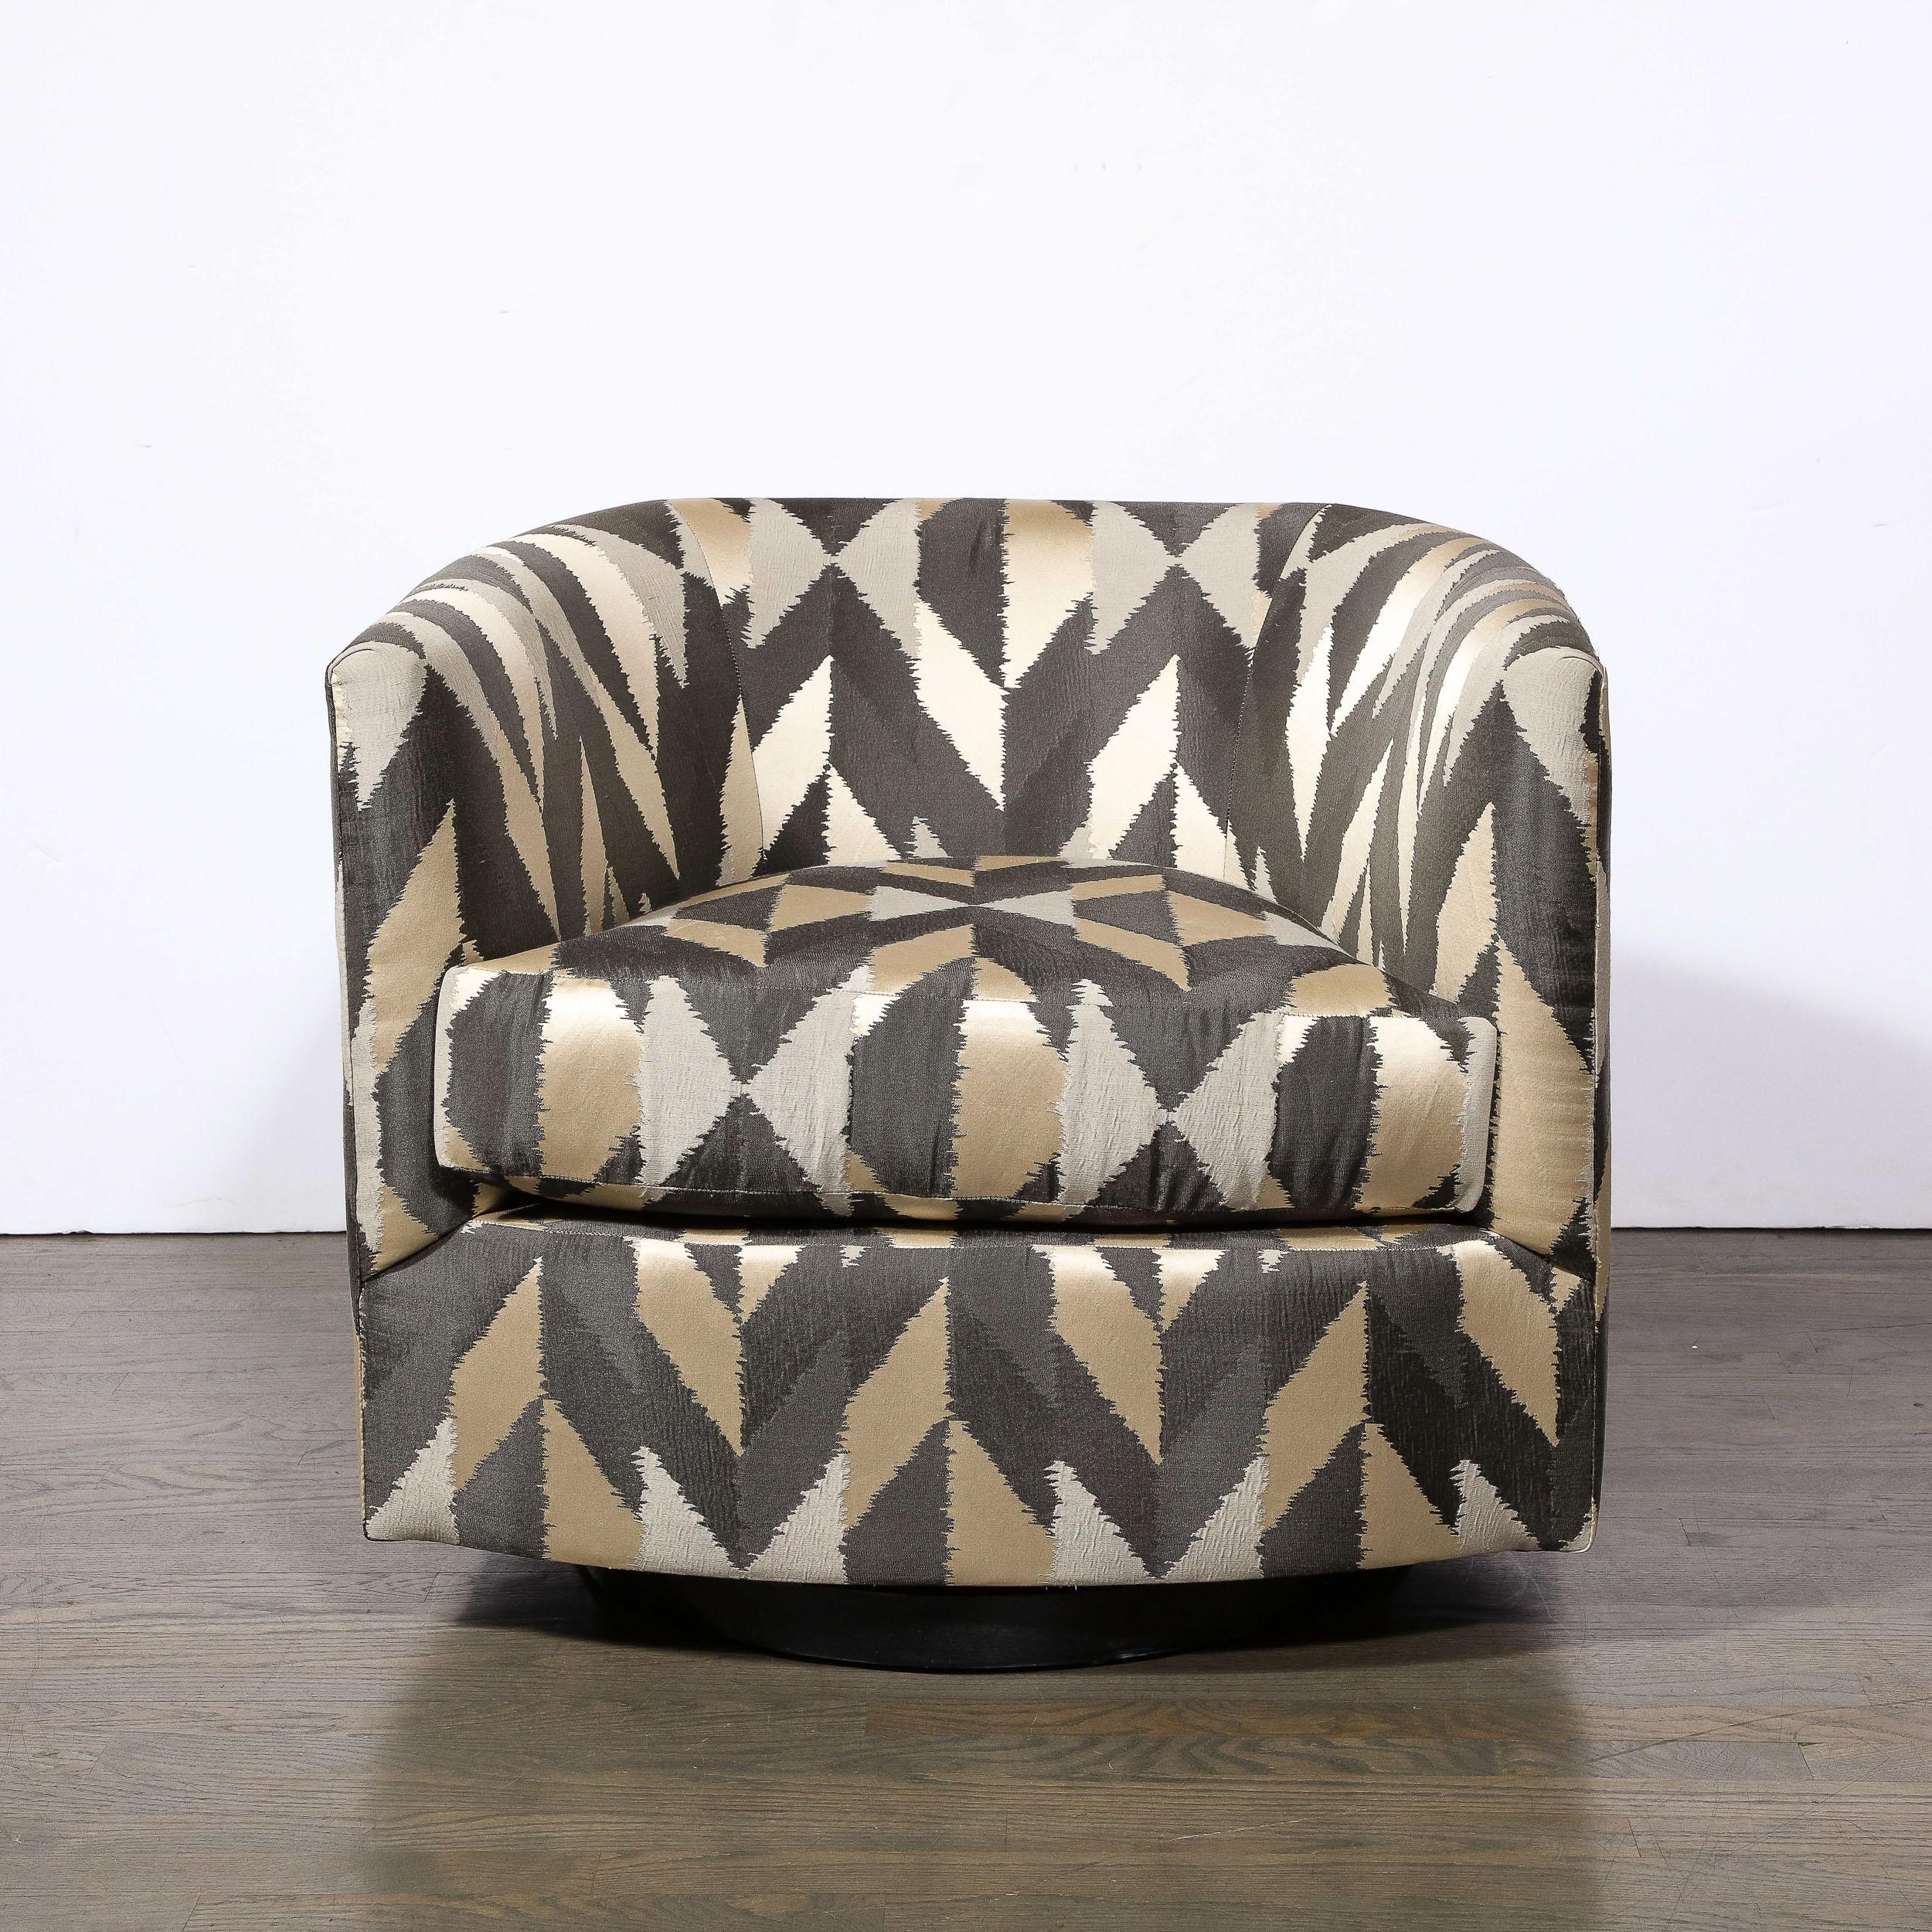 American Mid-Century Modernist Swivel Club Chairs in Staggered Geometric Upholstery  For Sale